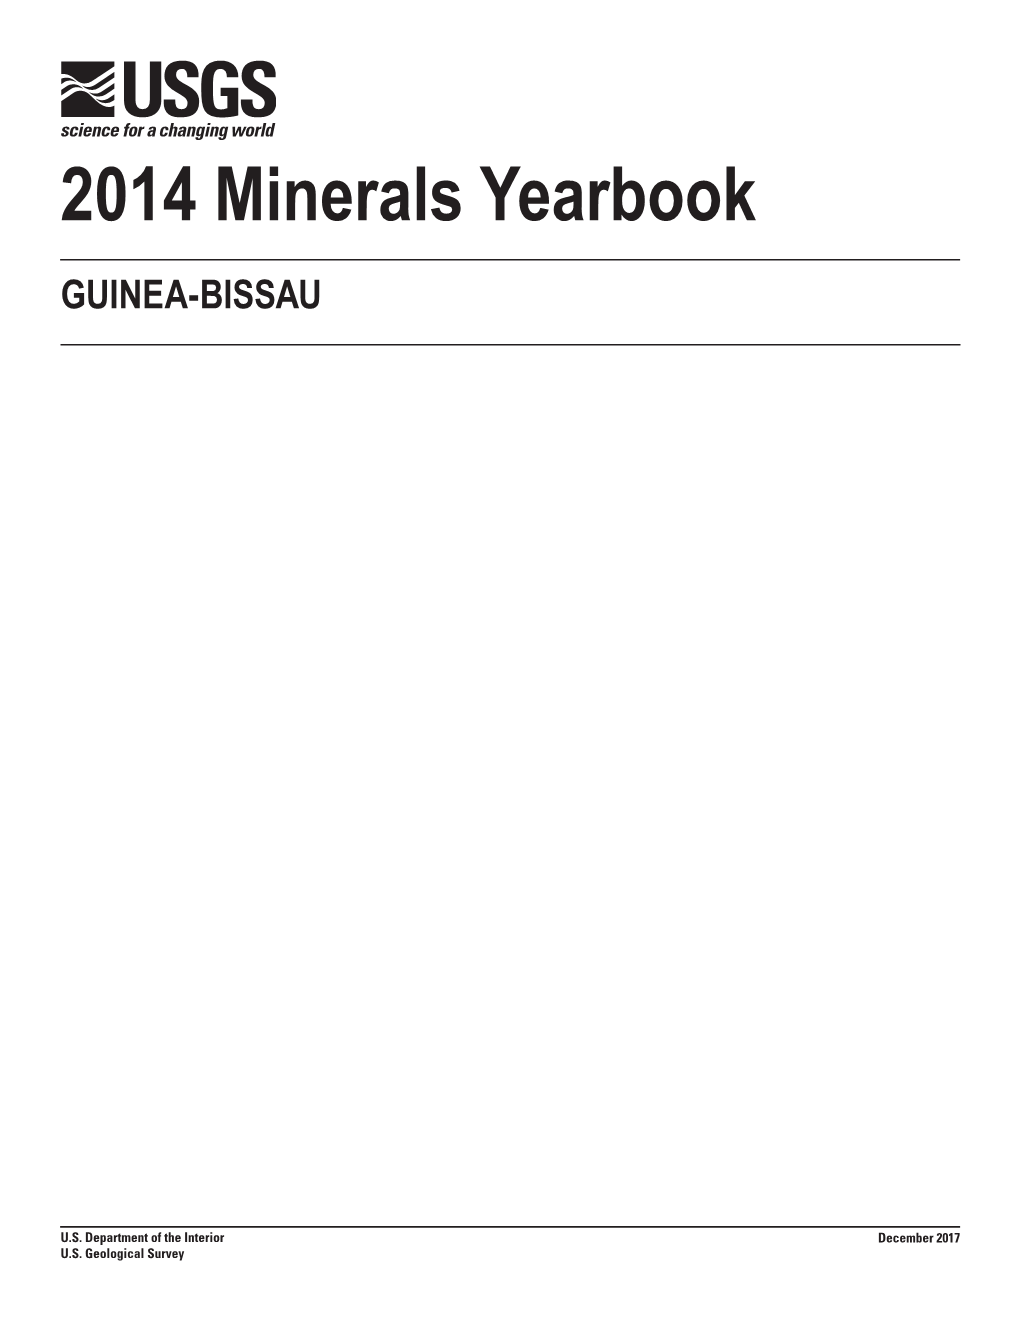 The Mineral Industry of Guinea-Bissau in 2014